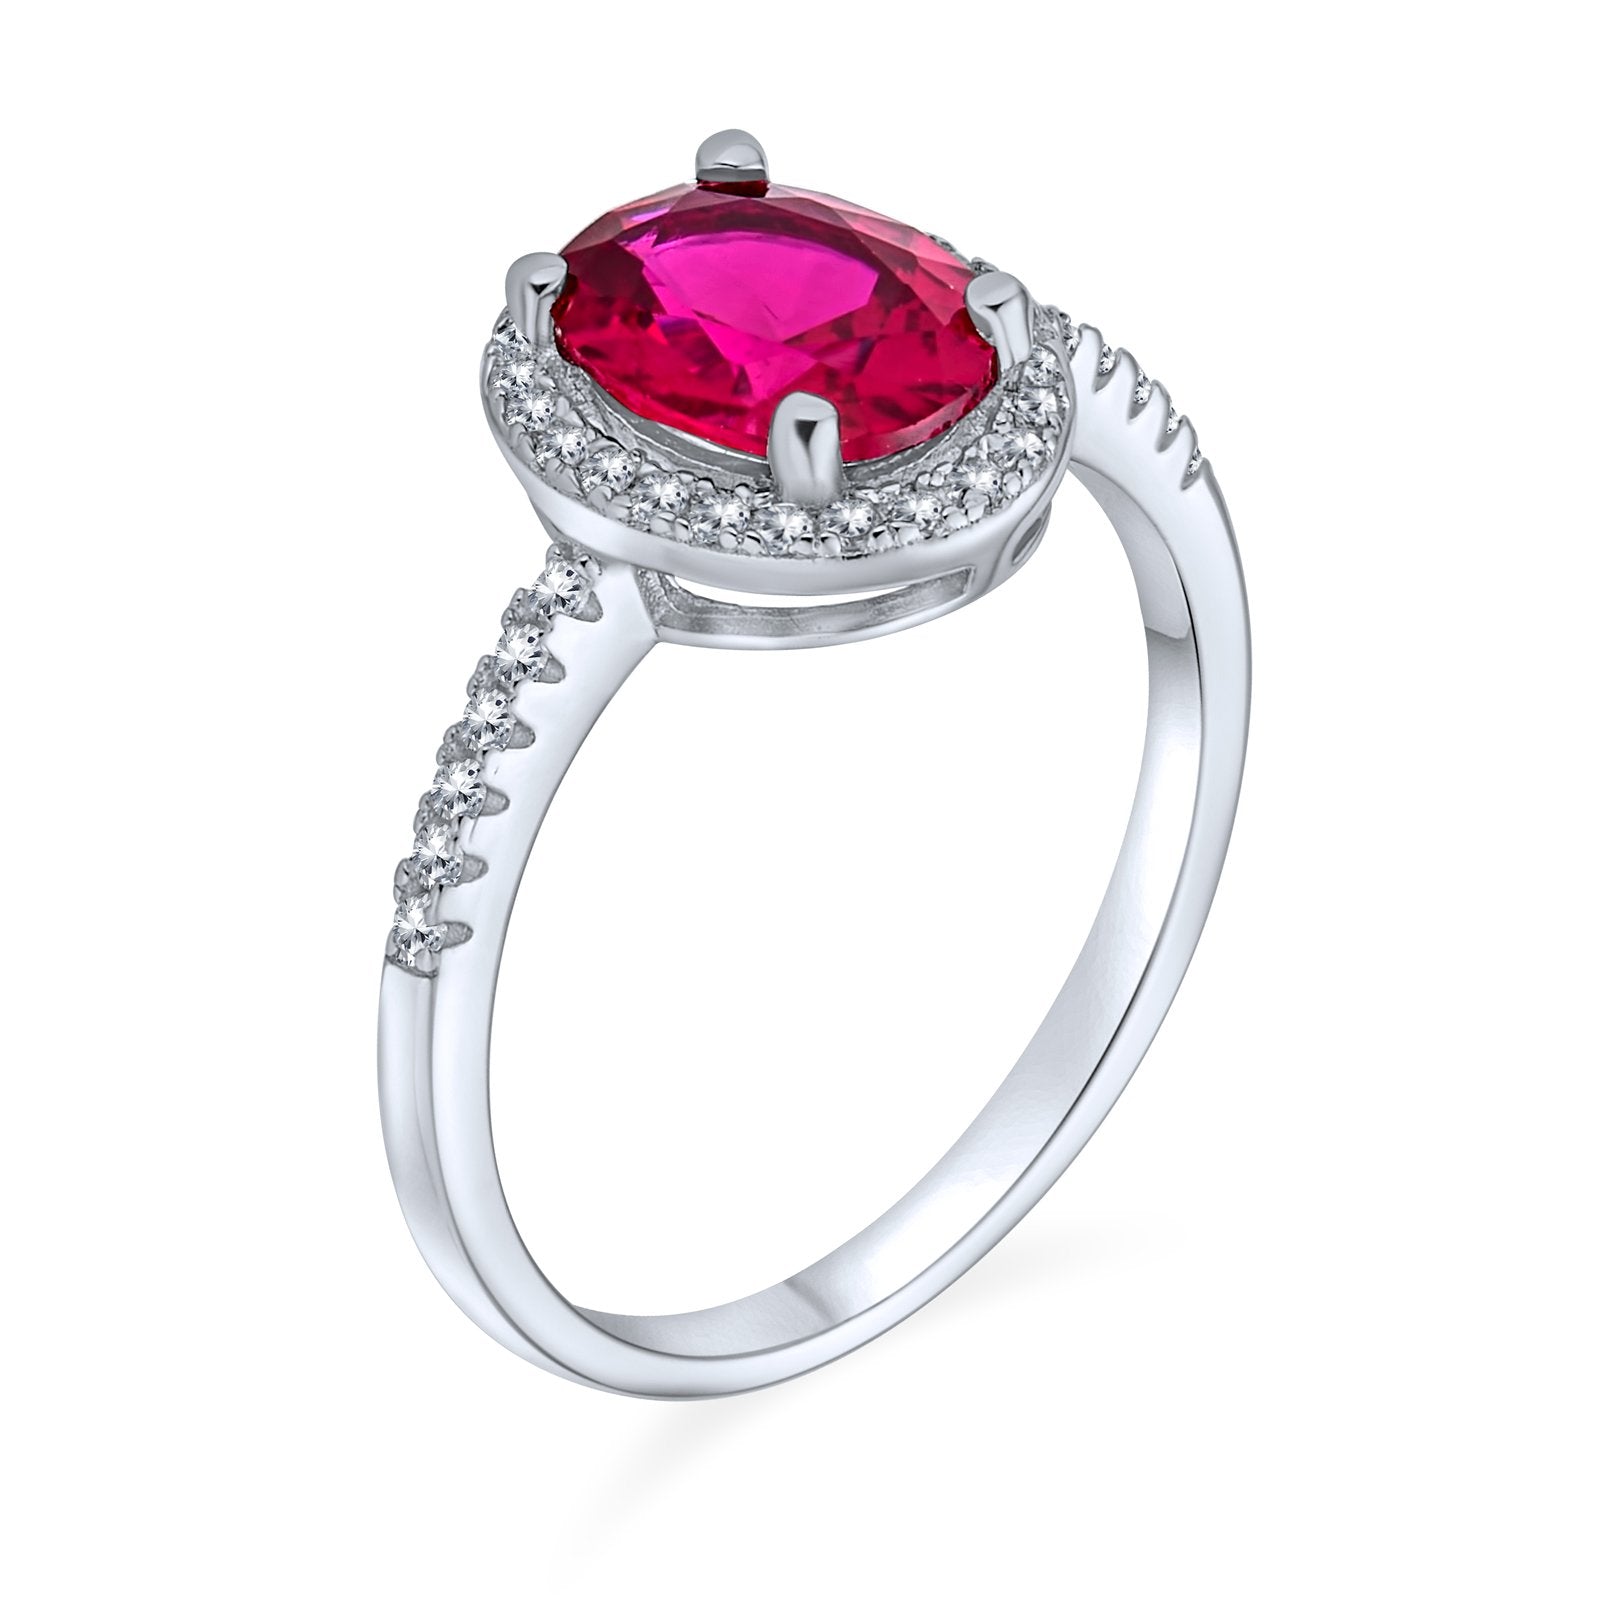 3CT CZ Oval Solitaire Halo Red Pink Engagement Ring Sterling Silver - Joyeria Lady